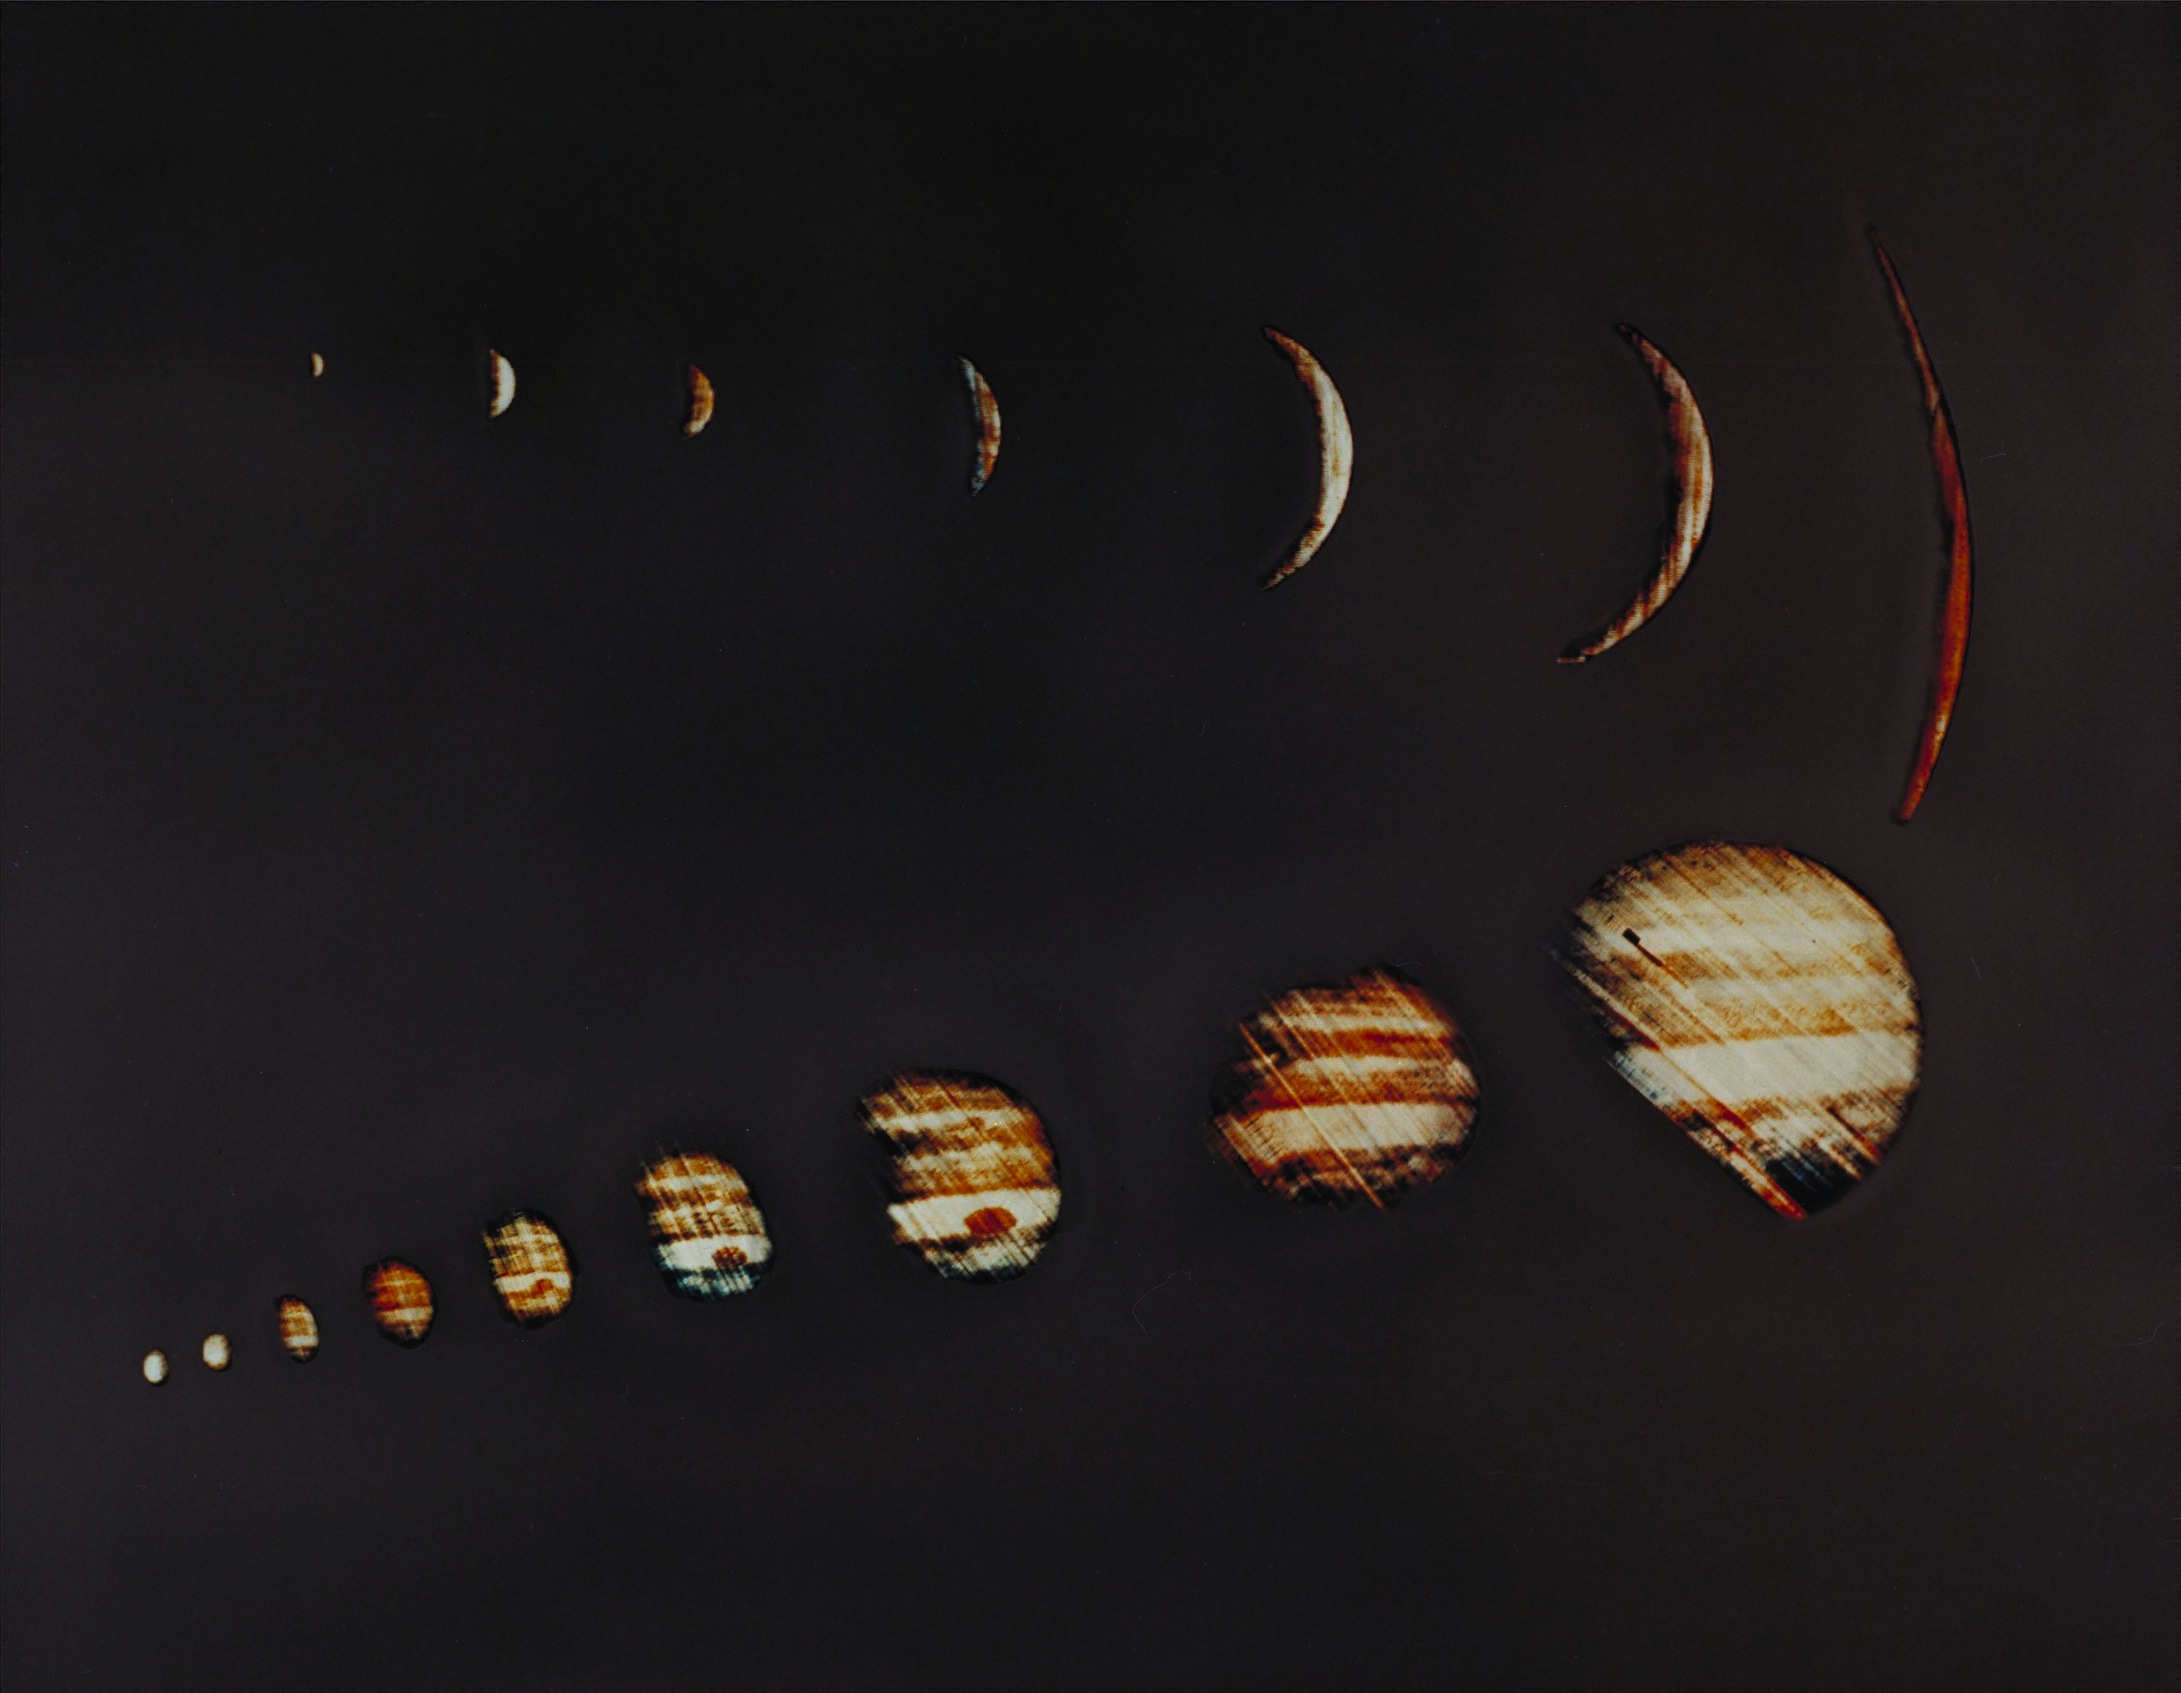 Sequence of Jupiter getting smaller then larger and vice versa.